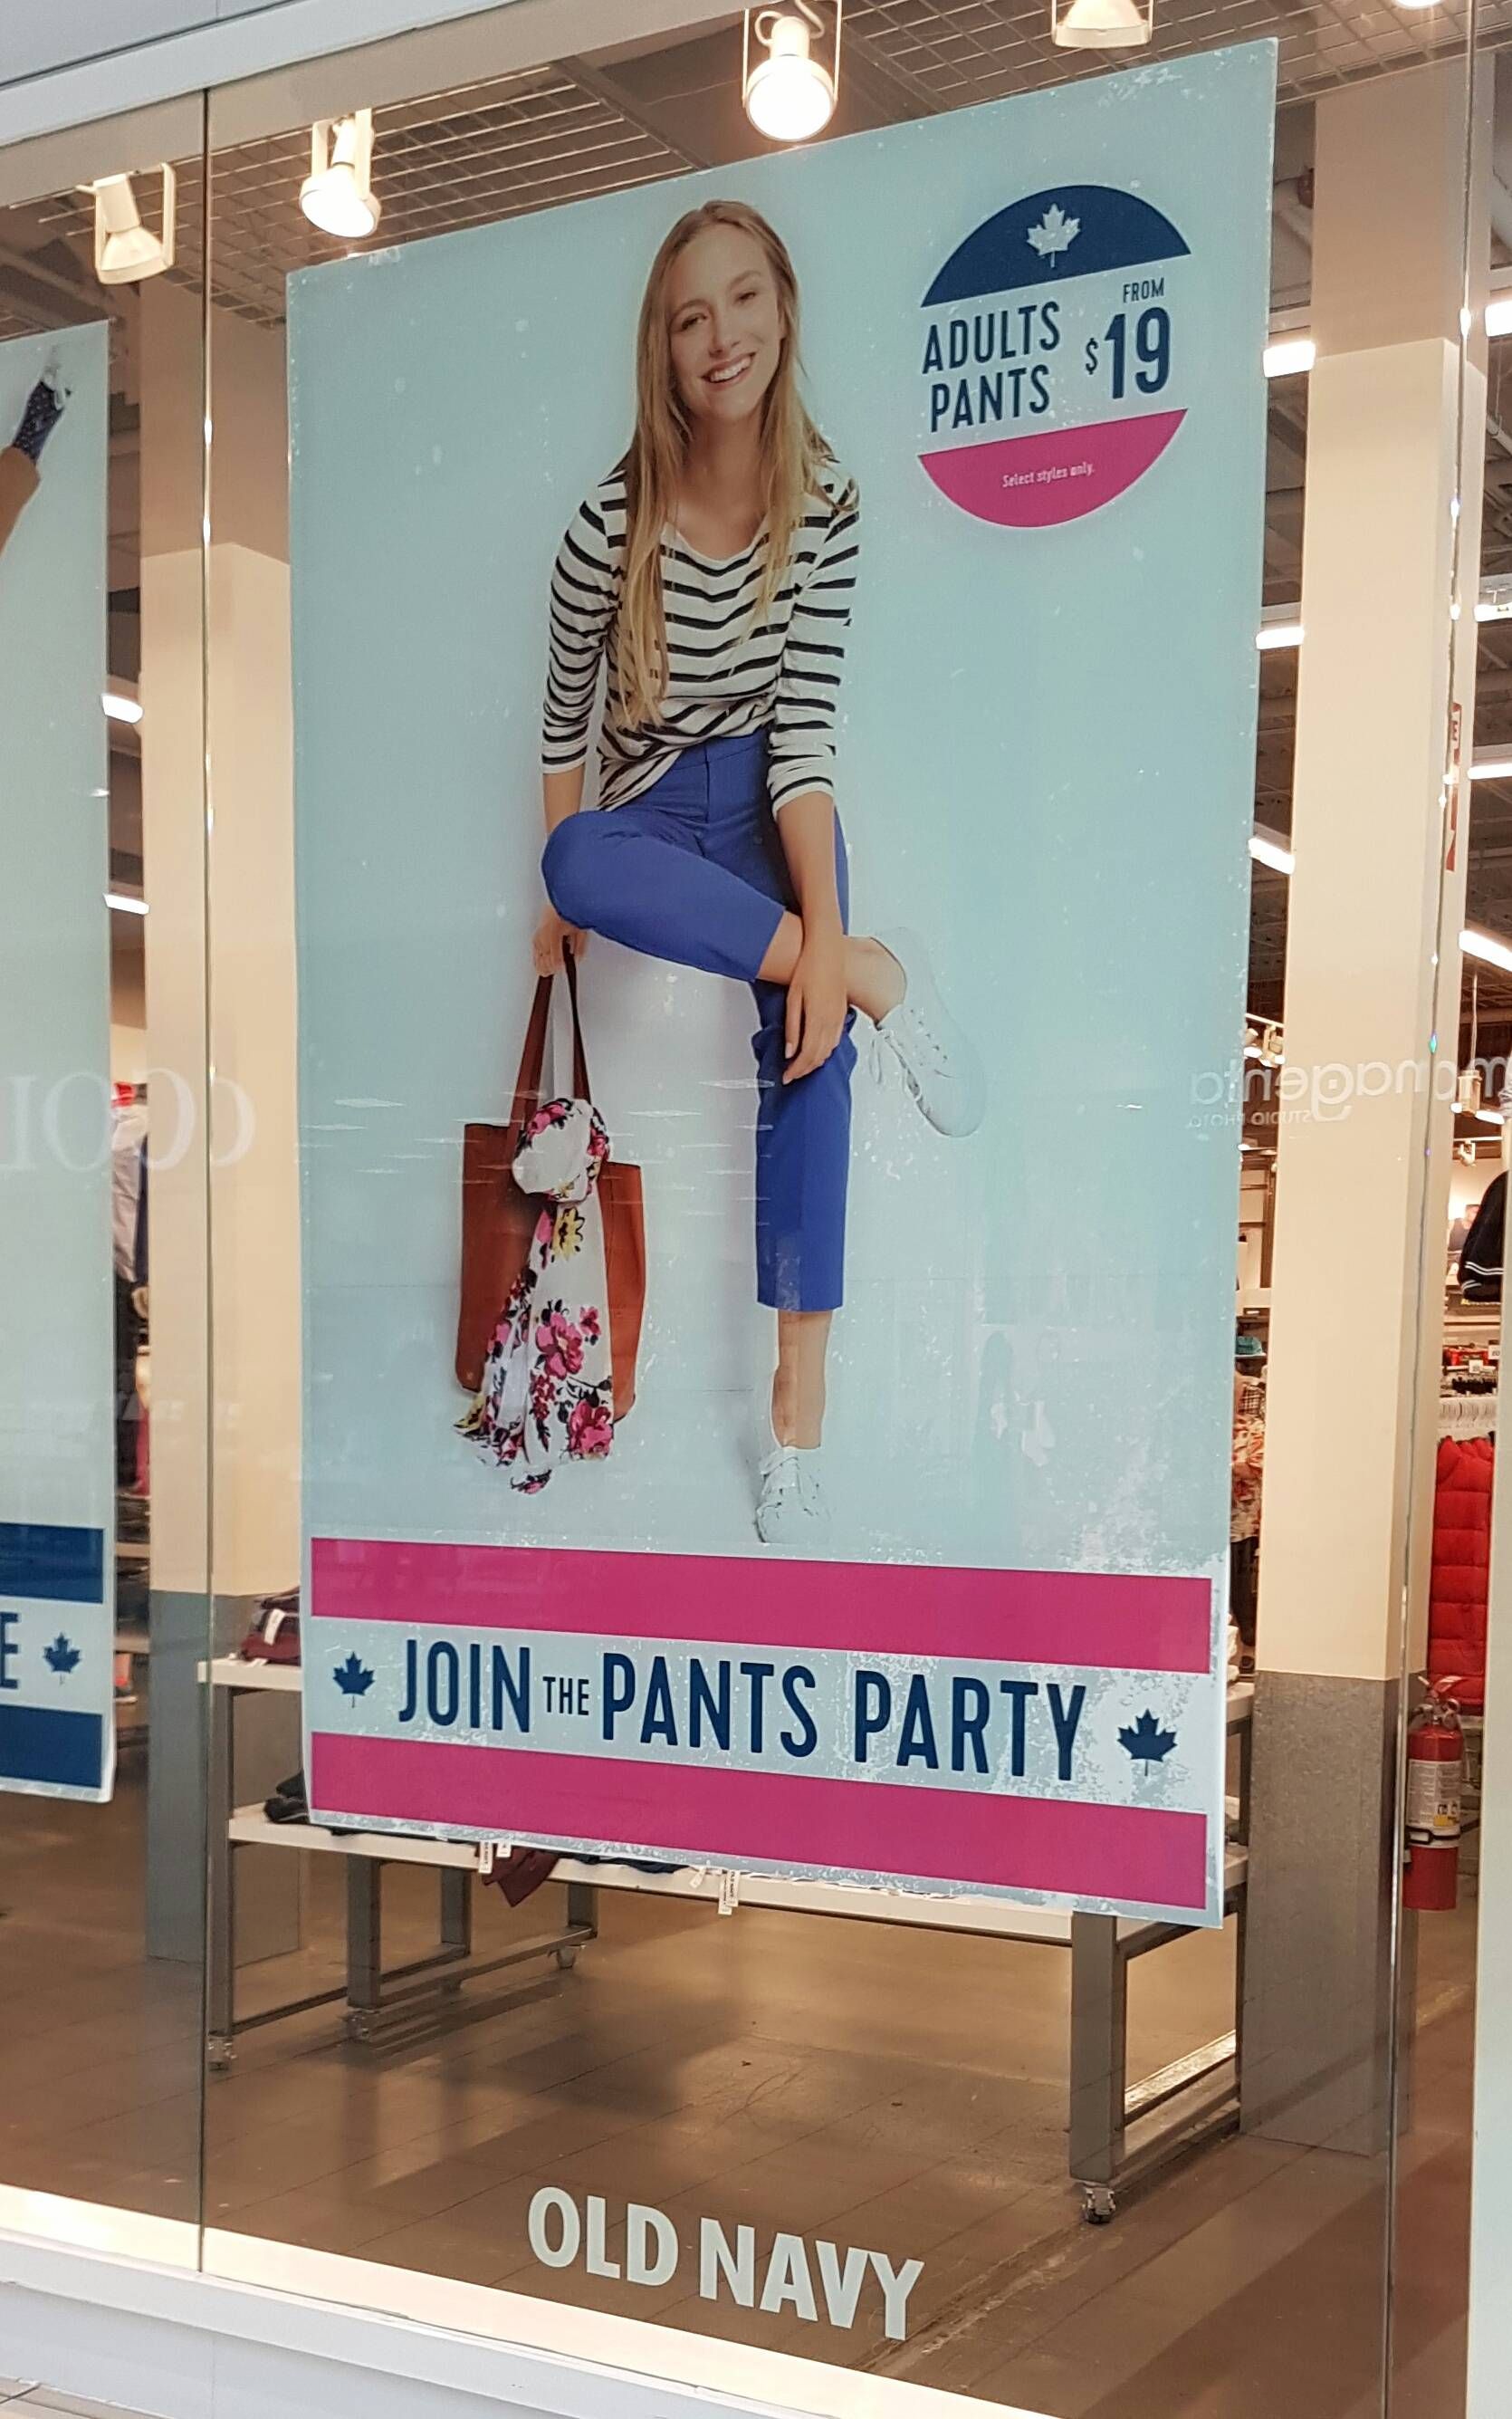 Are you inviting me to a party in your pants?